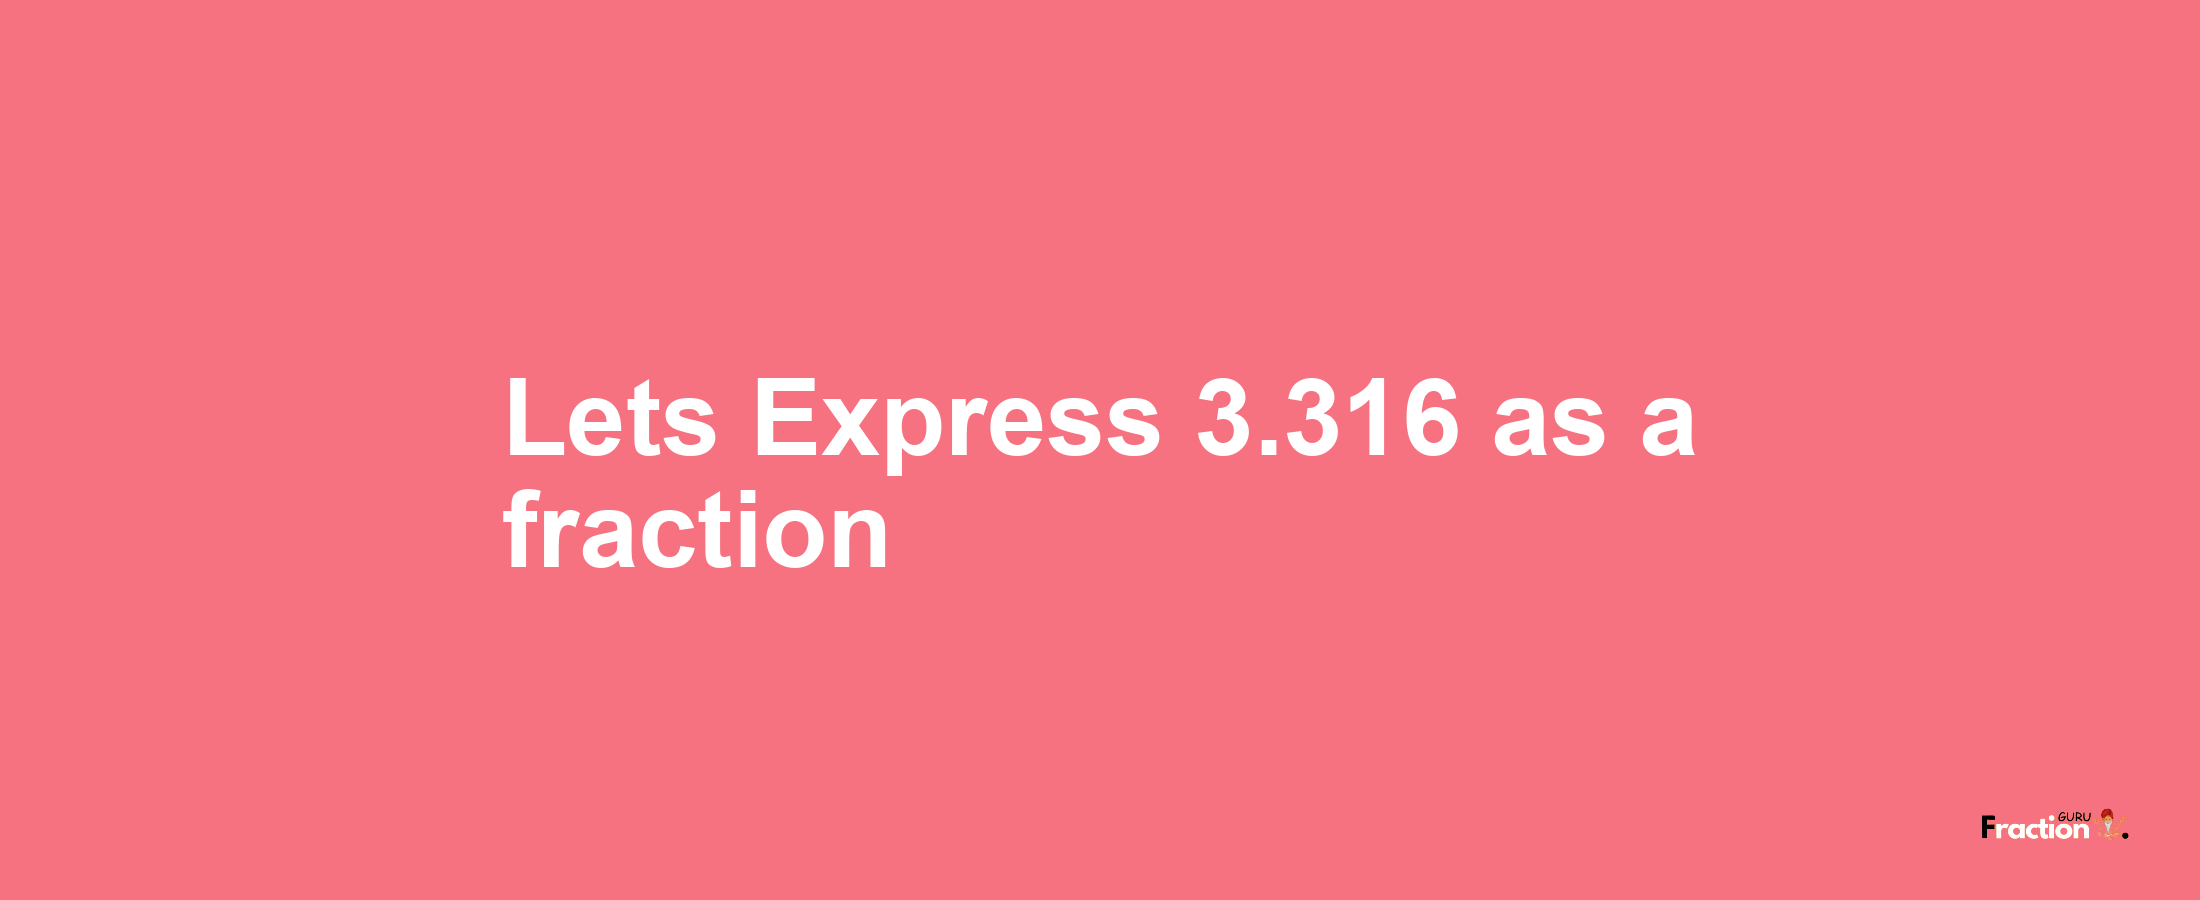 Lets Express 3.316 as afraction